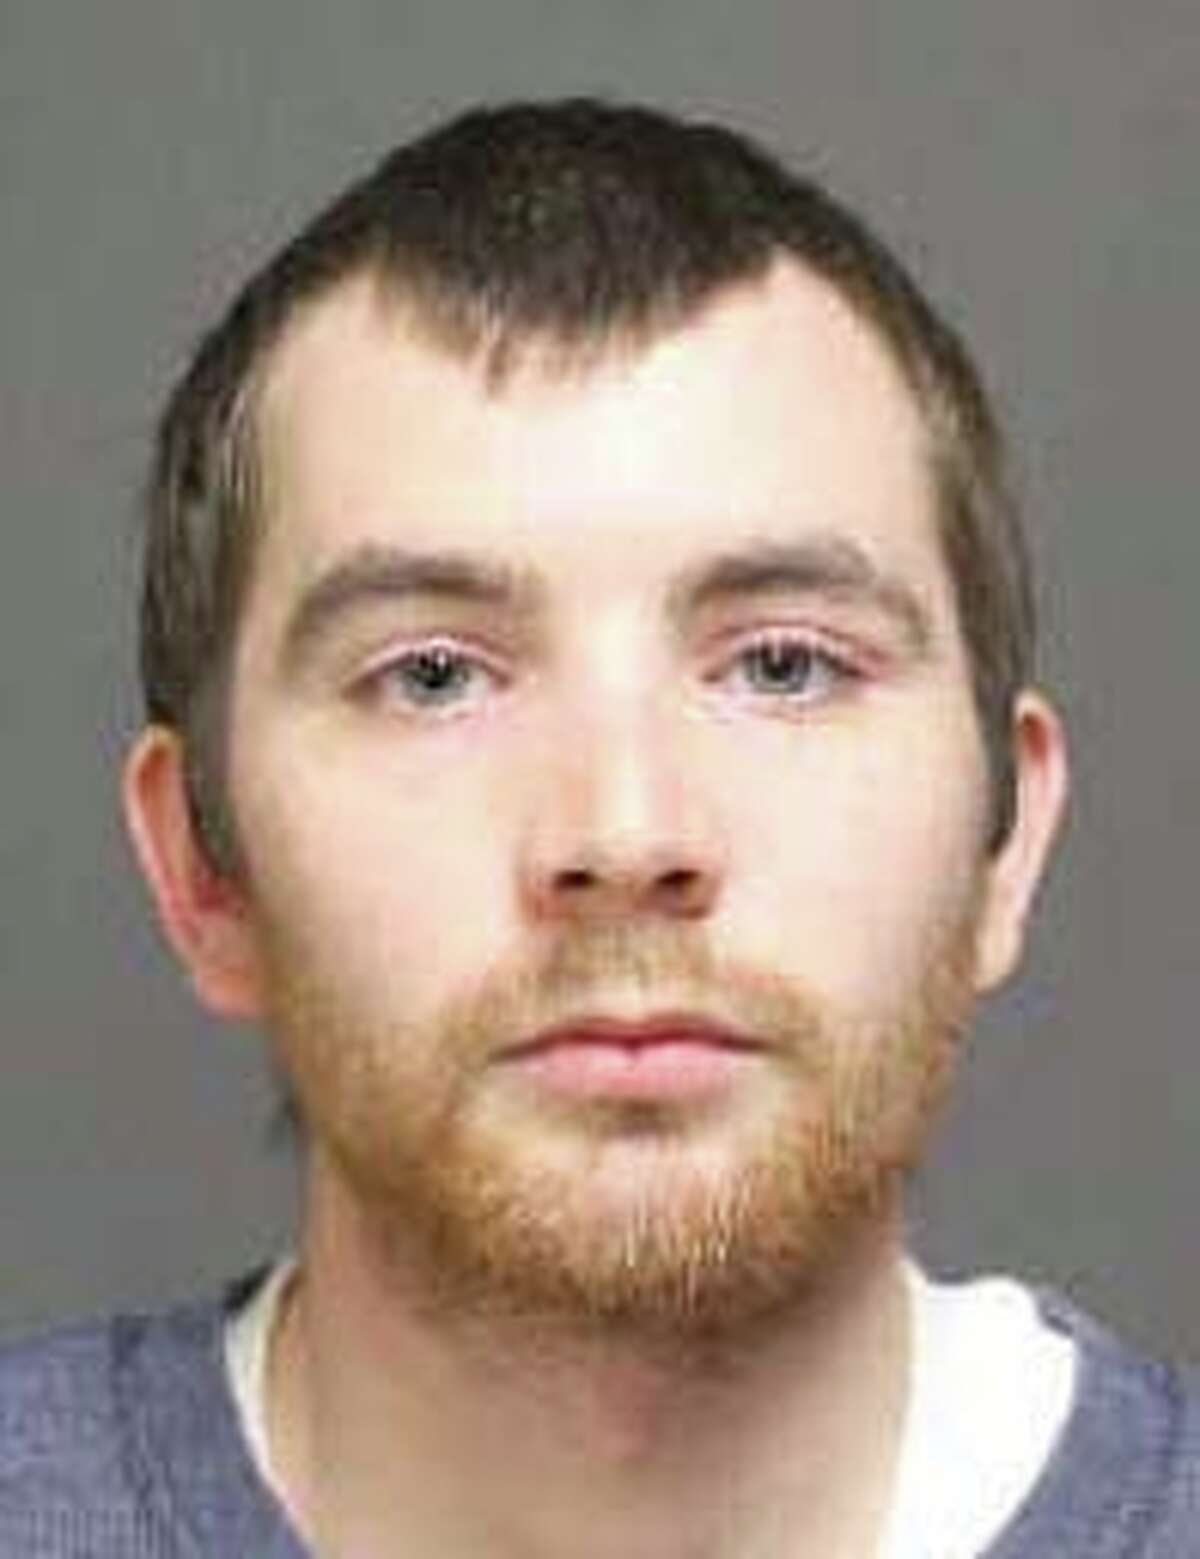 Vincent Colavito, 23, of Bridgeport, was arrested for stealing video games.